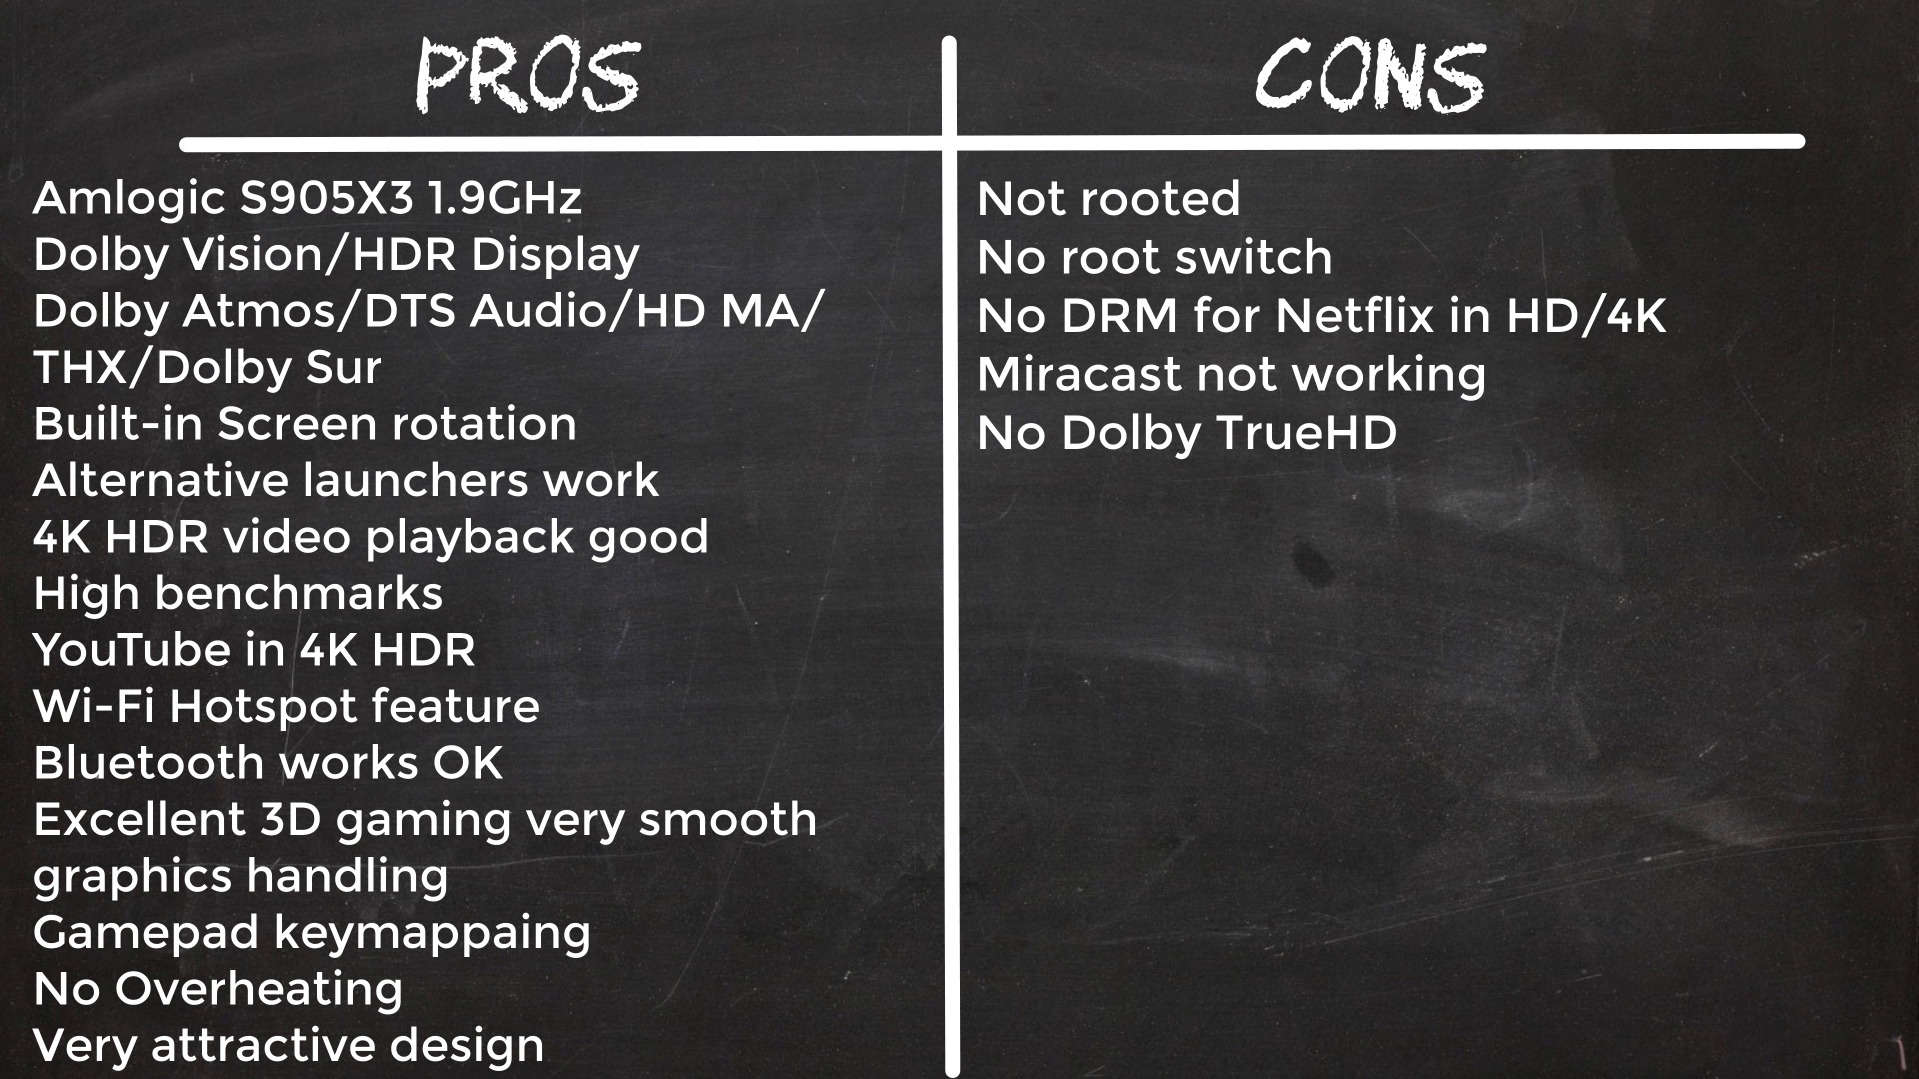 MXQ G9X3 Pros and cons